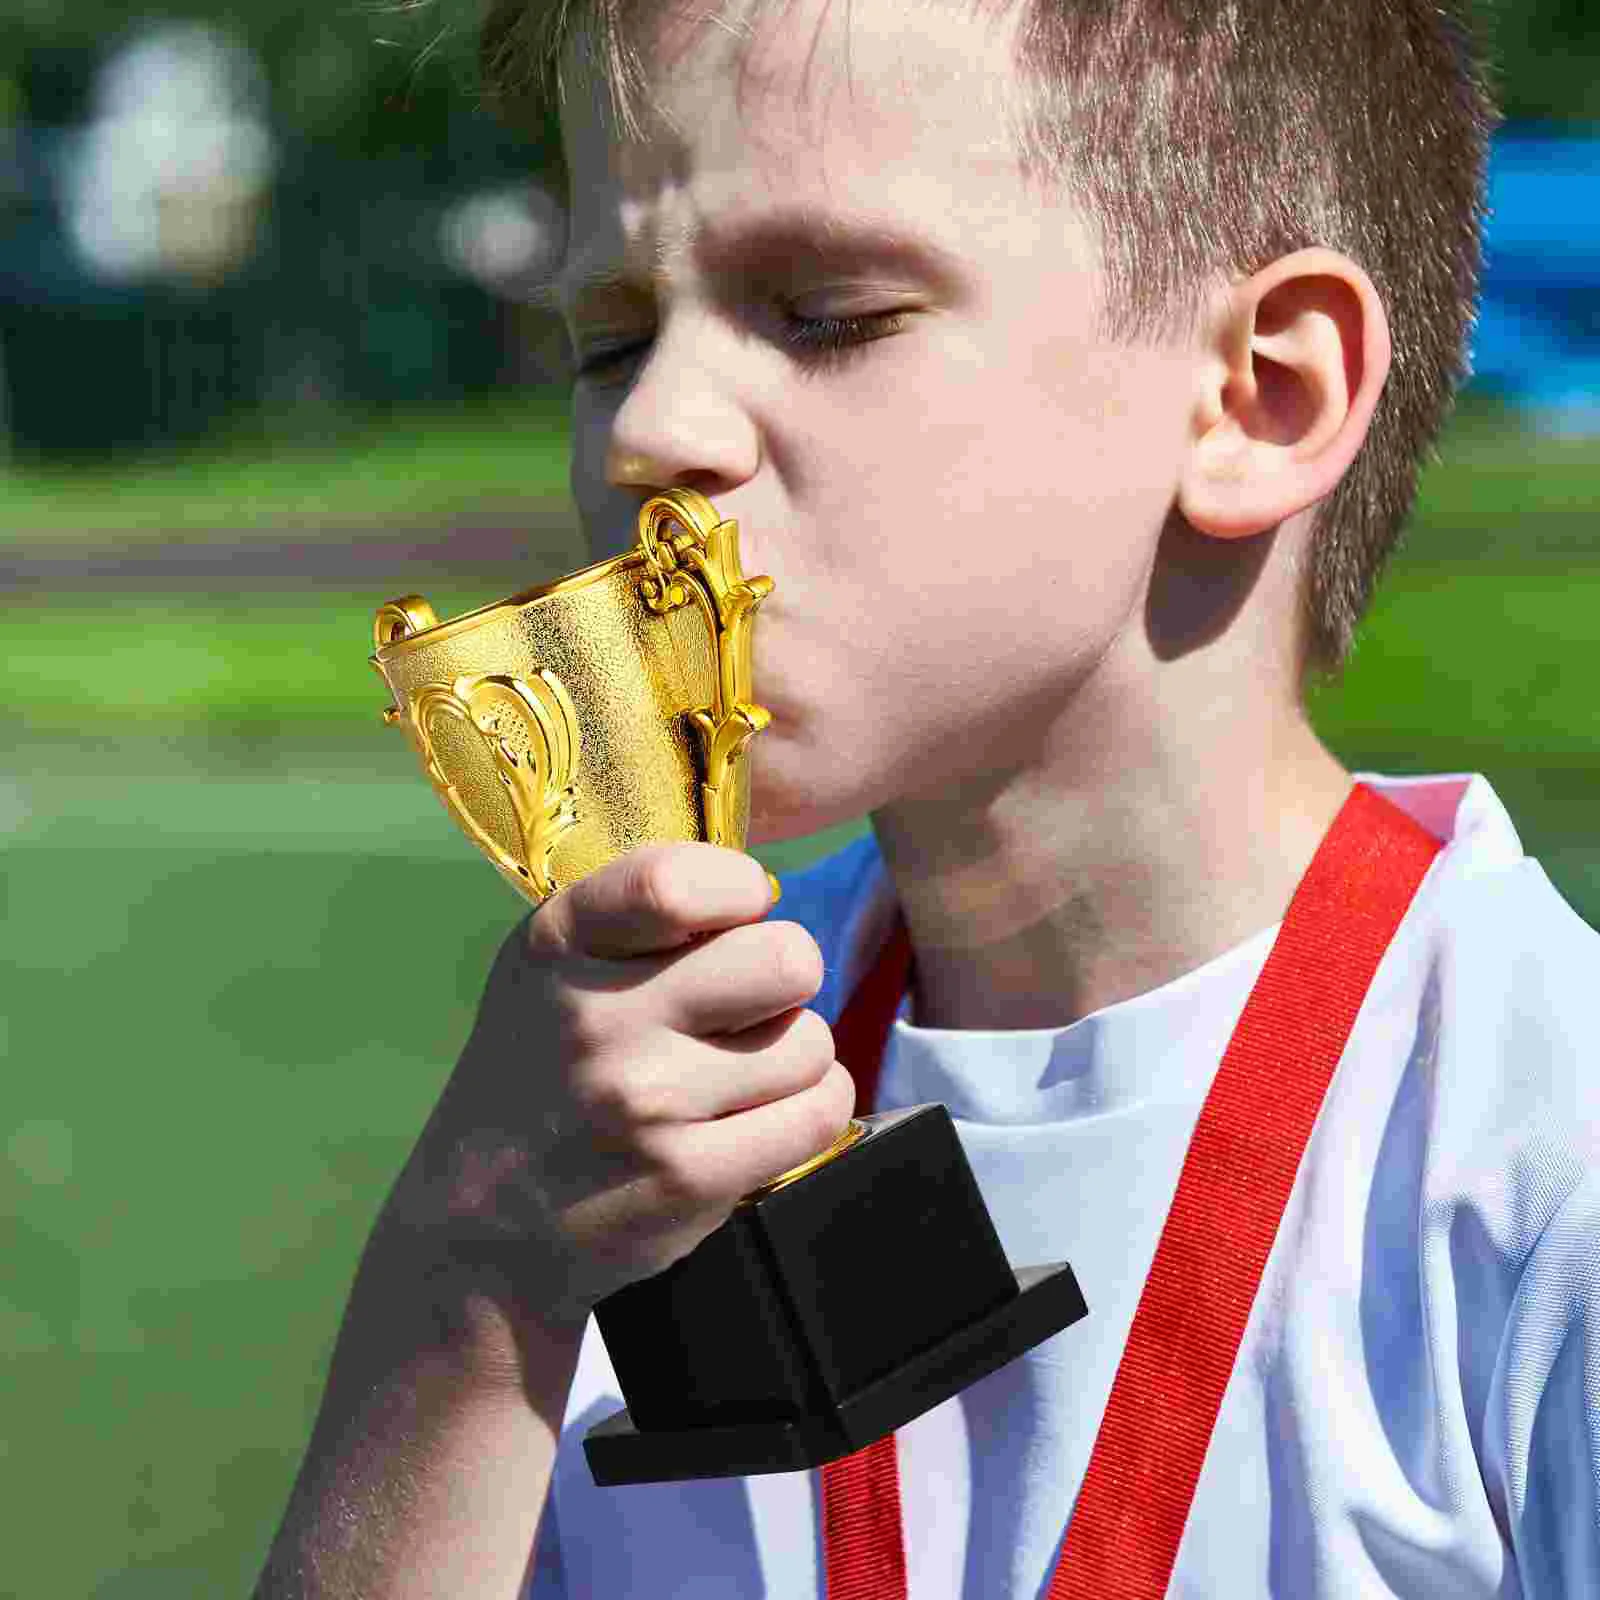 

Award Trophy for Kids First Place Winner Award Trophy Toy Sports Tournaments Games Competitions Prize Party Favor